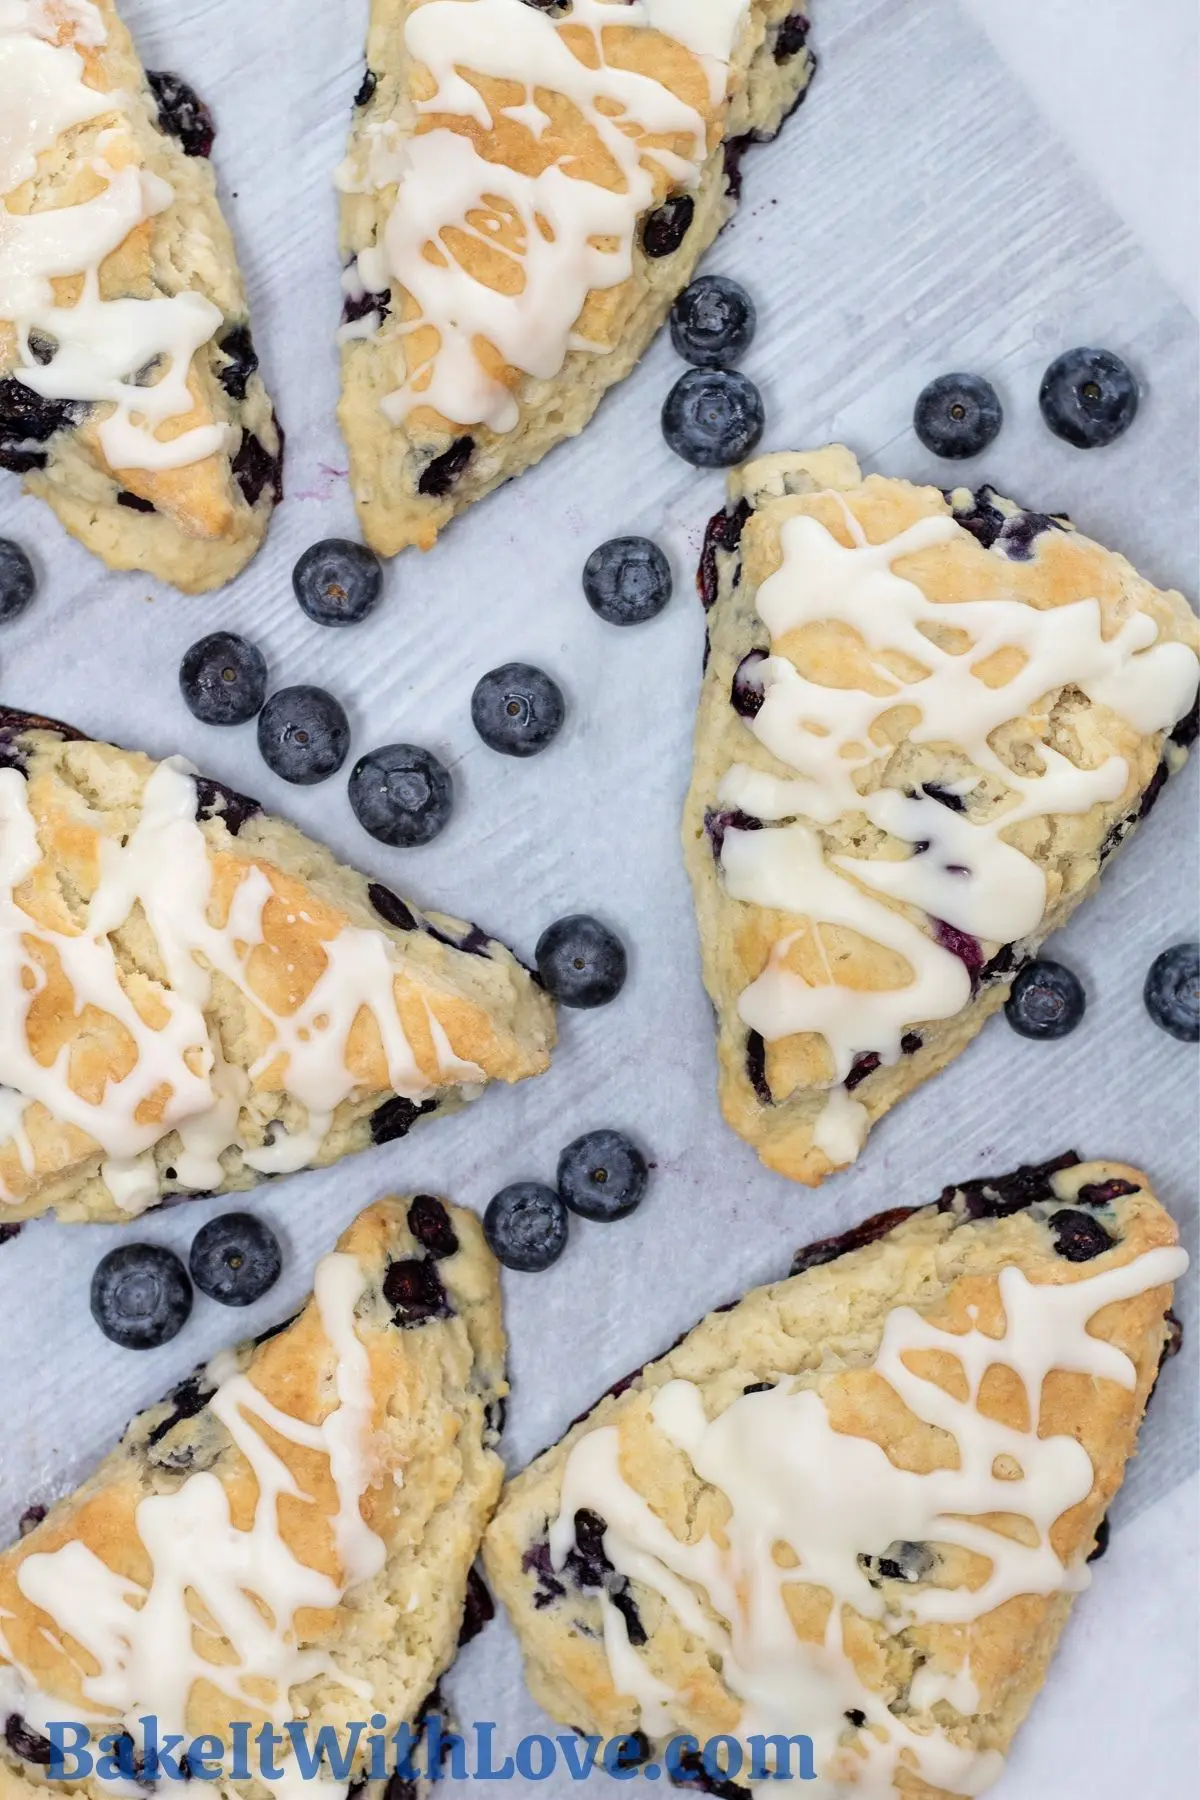 Multiple scones, iced with blueberries.